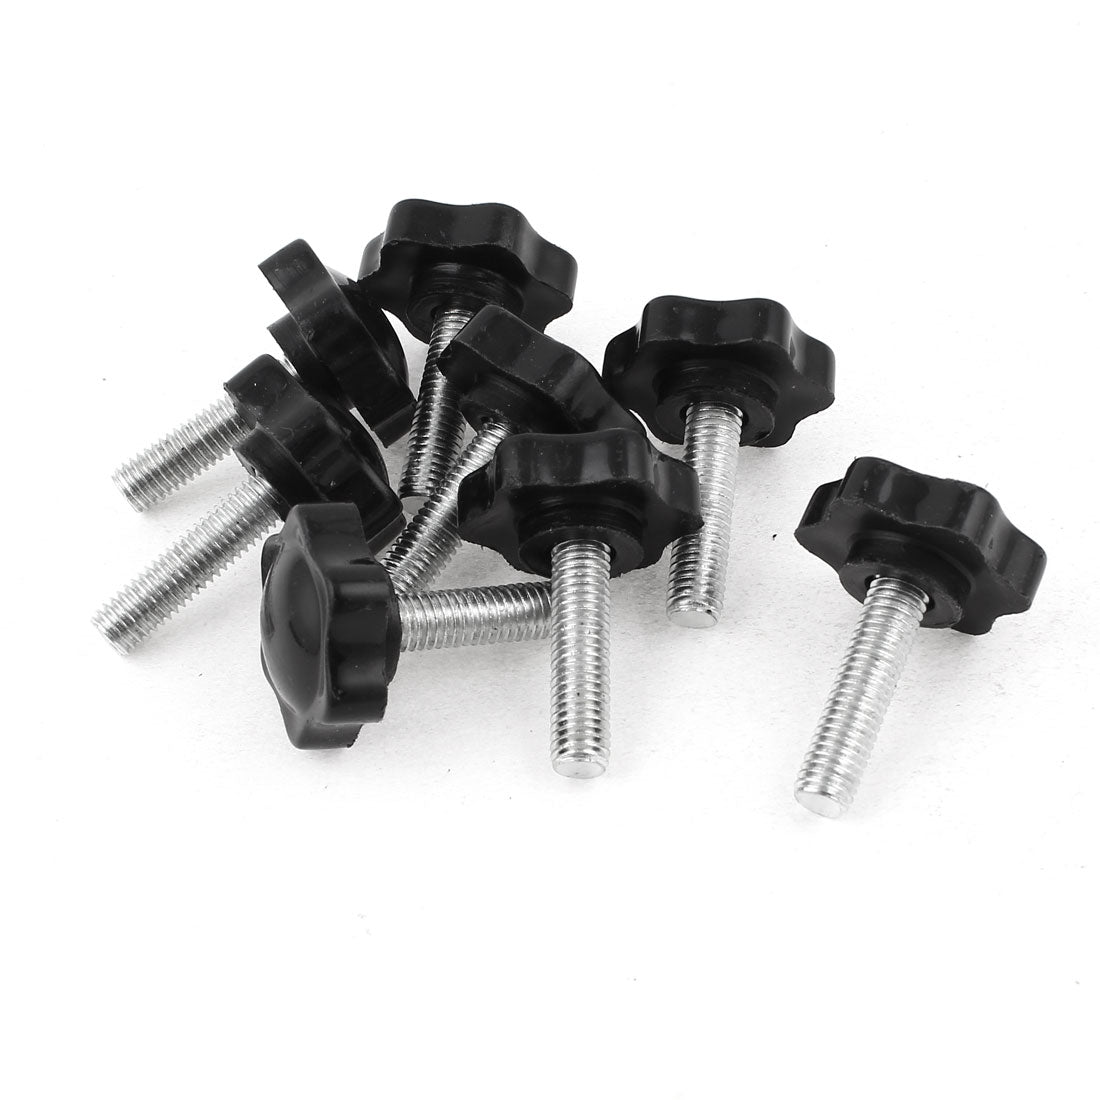 uxcell Uxcell 8 Pcs Black Spare Part M8 x 30mm Male Threaded Knurled Grip Star Knob